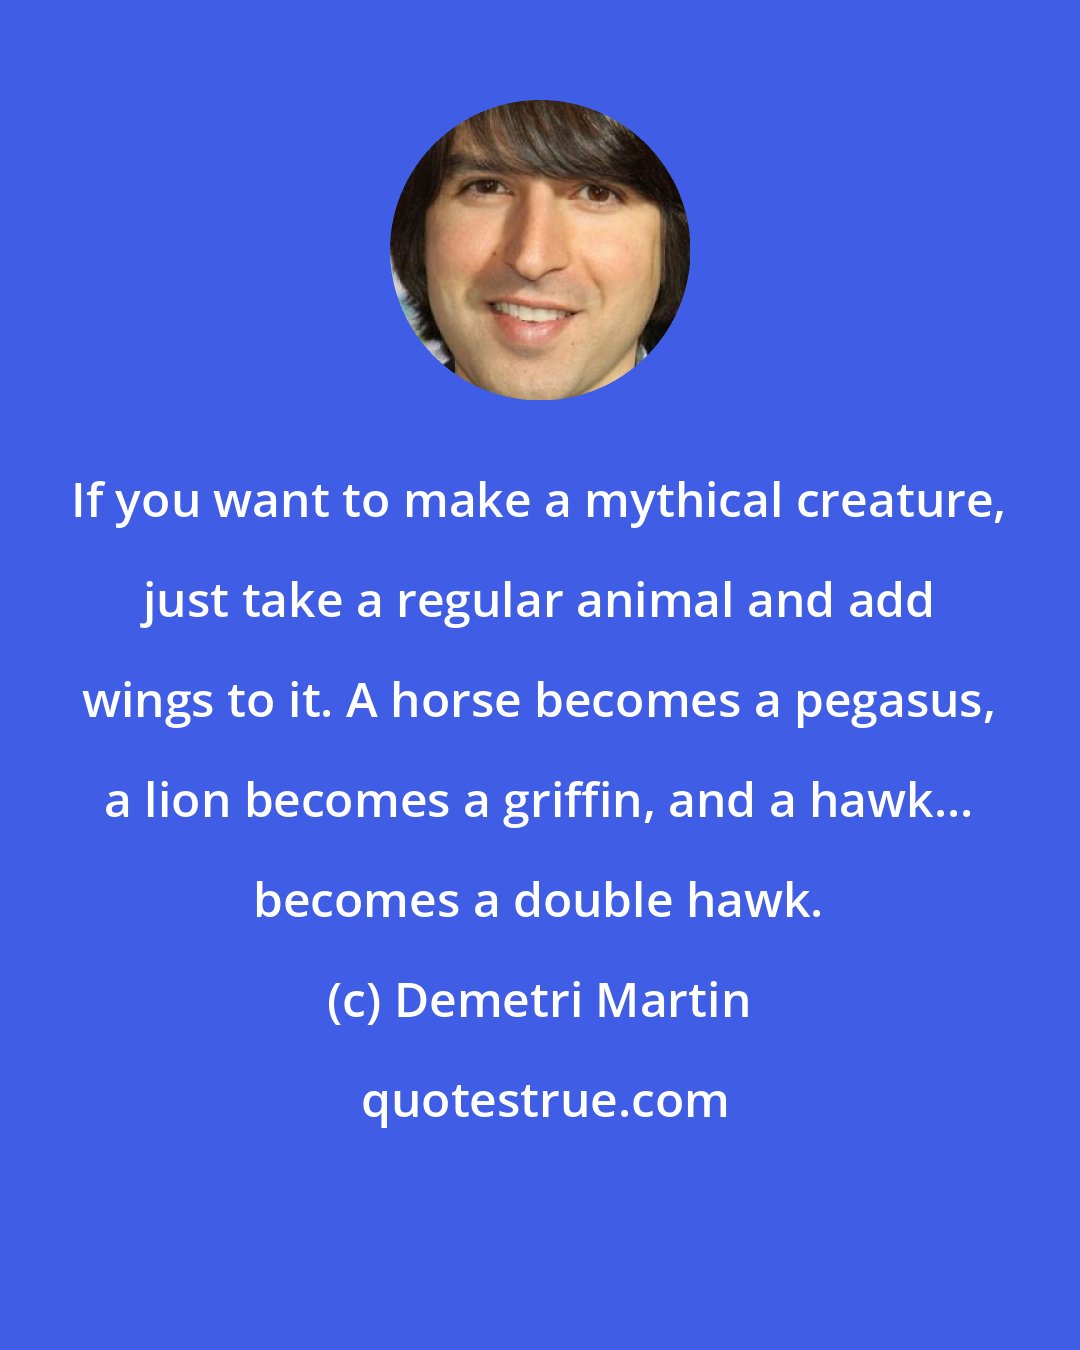 Demetri Martin: If you want to make a mythical creature, just take a regular animal and add wings to it. A horse becomes a pegasus, a lion becomes a griffin, and a hawk... becomes a double hawk.